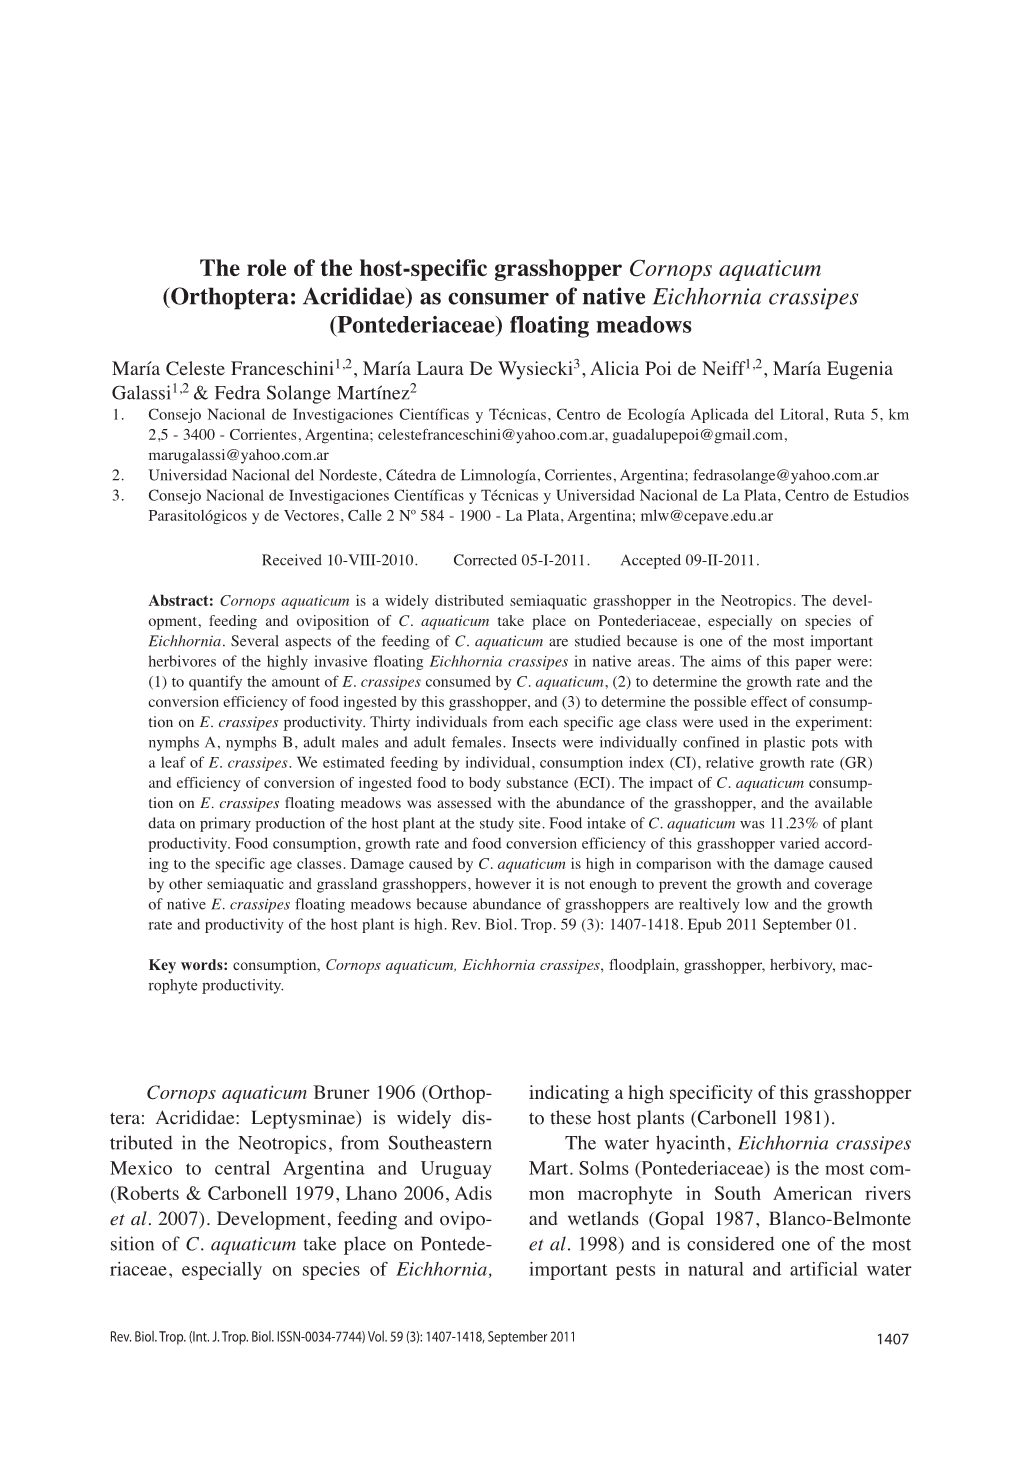 The Role of the Host-Specific Grasshopper Cornops Aquaticum (Orthoptera: Acrididae) As Consumer of Native Eichhornia Crassipes (Pontederiaceae) Floating Meadows